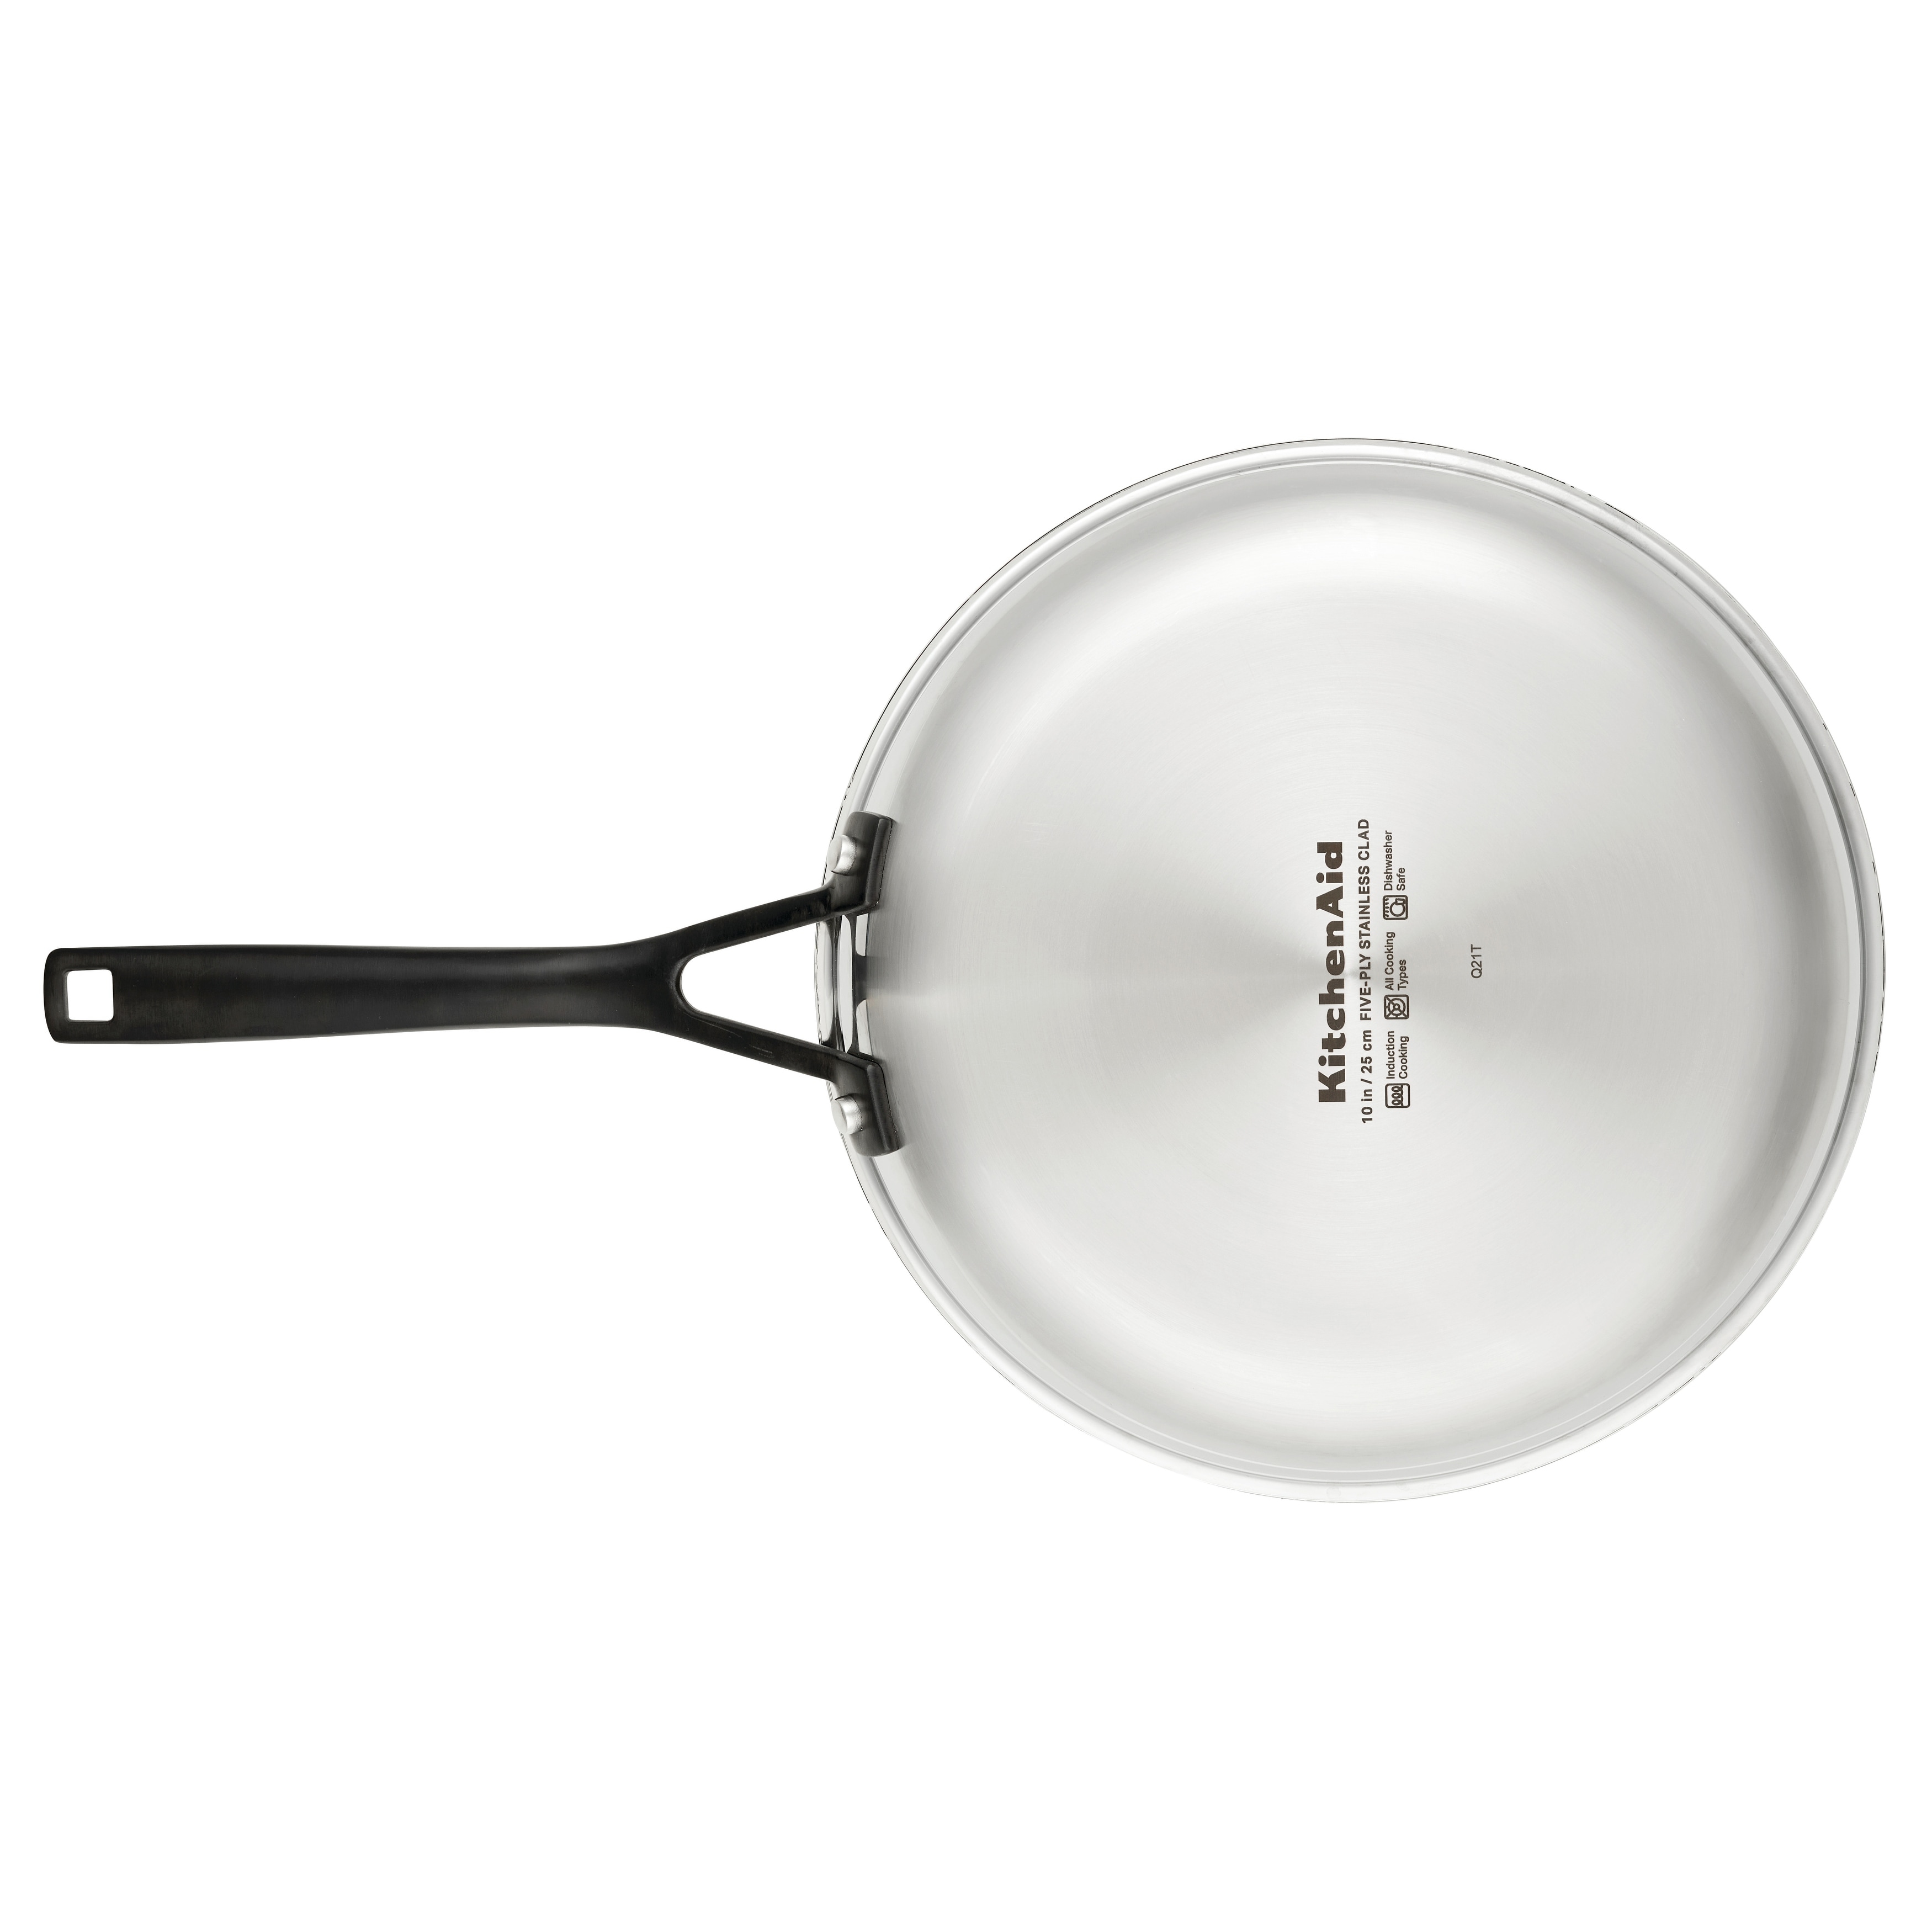 Kitchenaid Fry Pans, Stainless Steel